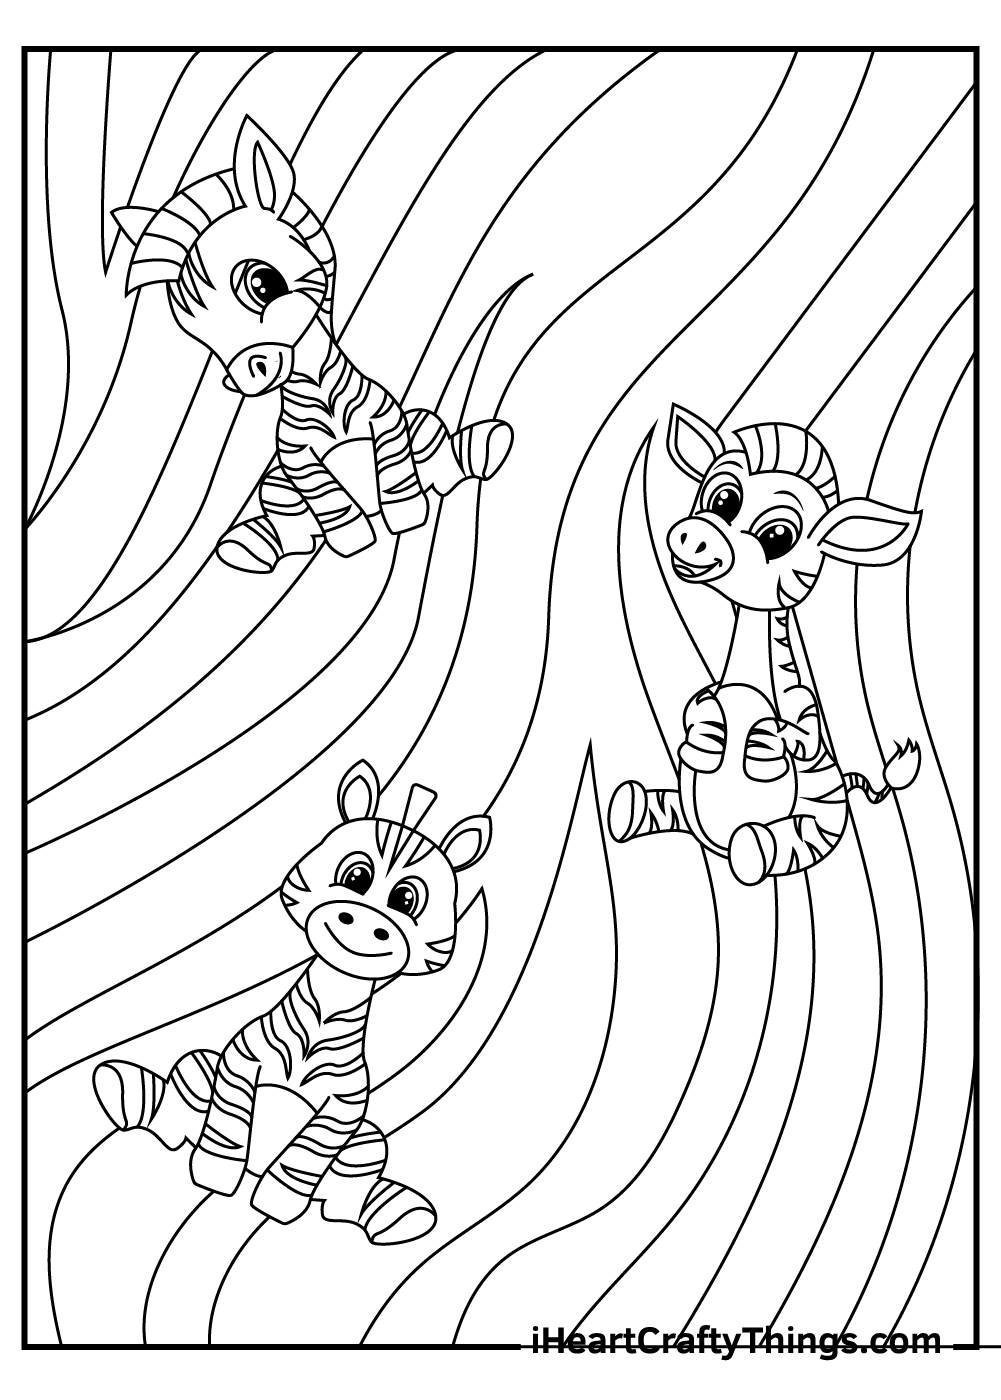 images of zebra coloring pages